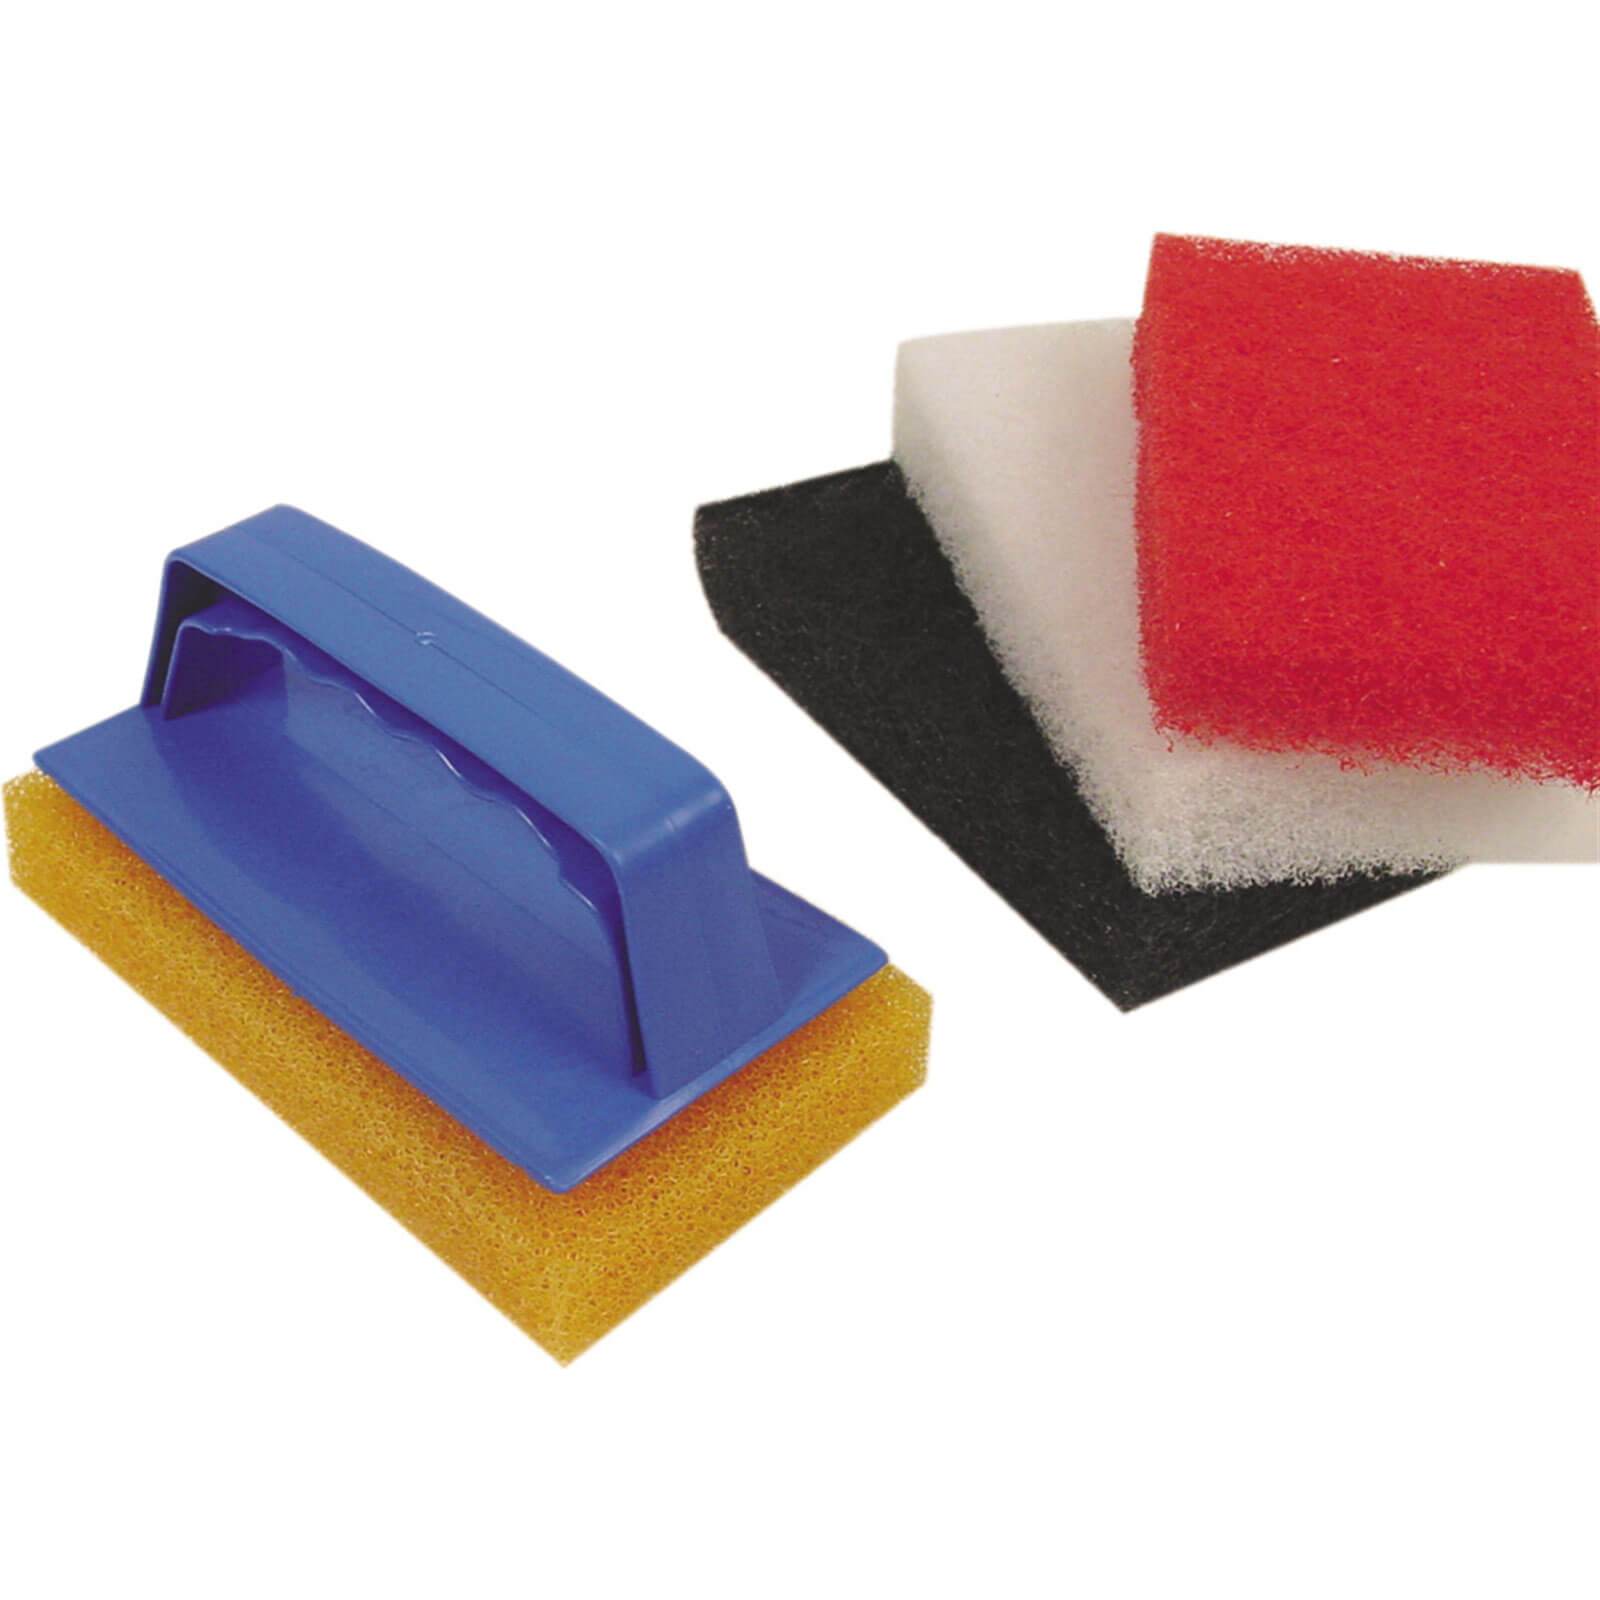 Image of Vitrex Grout Clean Up and Tile Polishing Kit